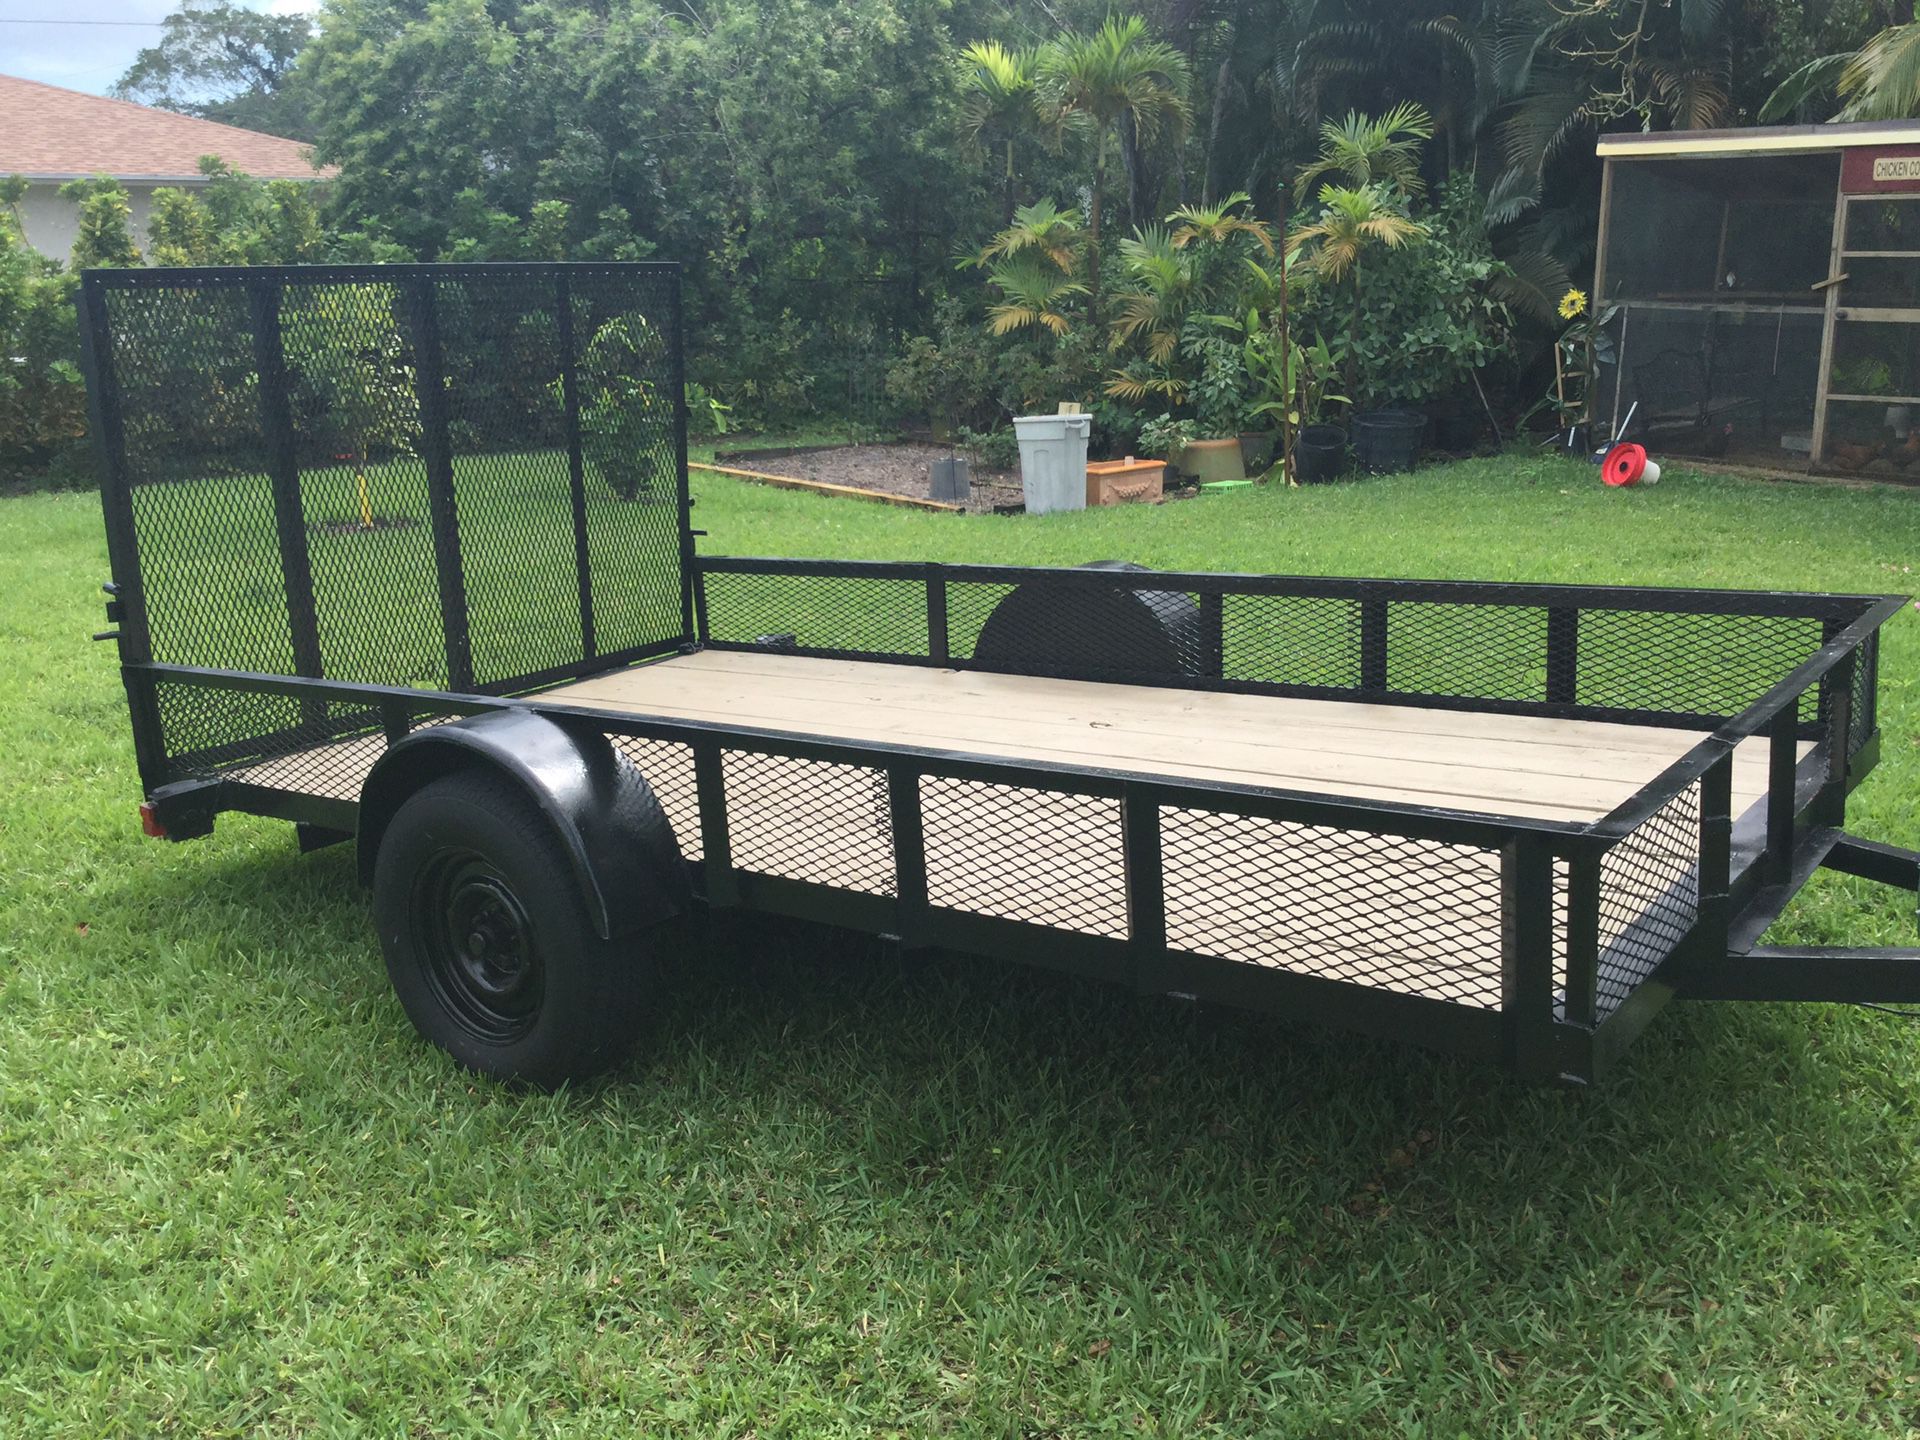 6’ x 12’ Trailer with Reinforced Ramp